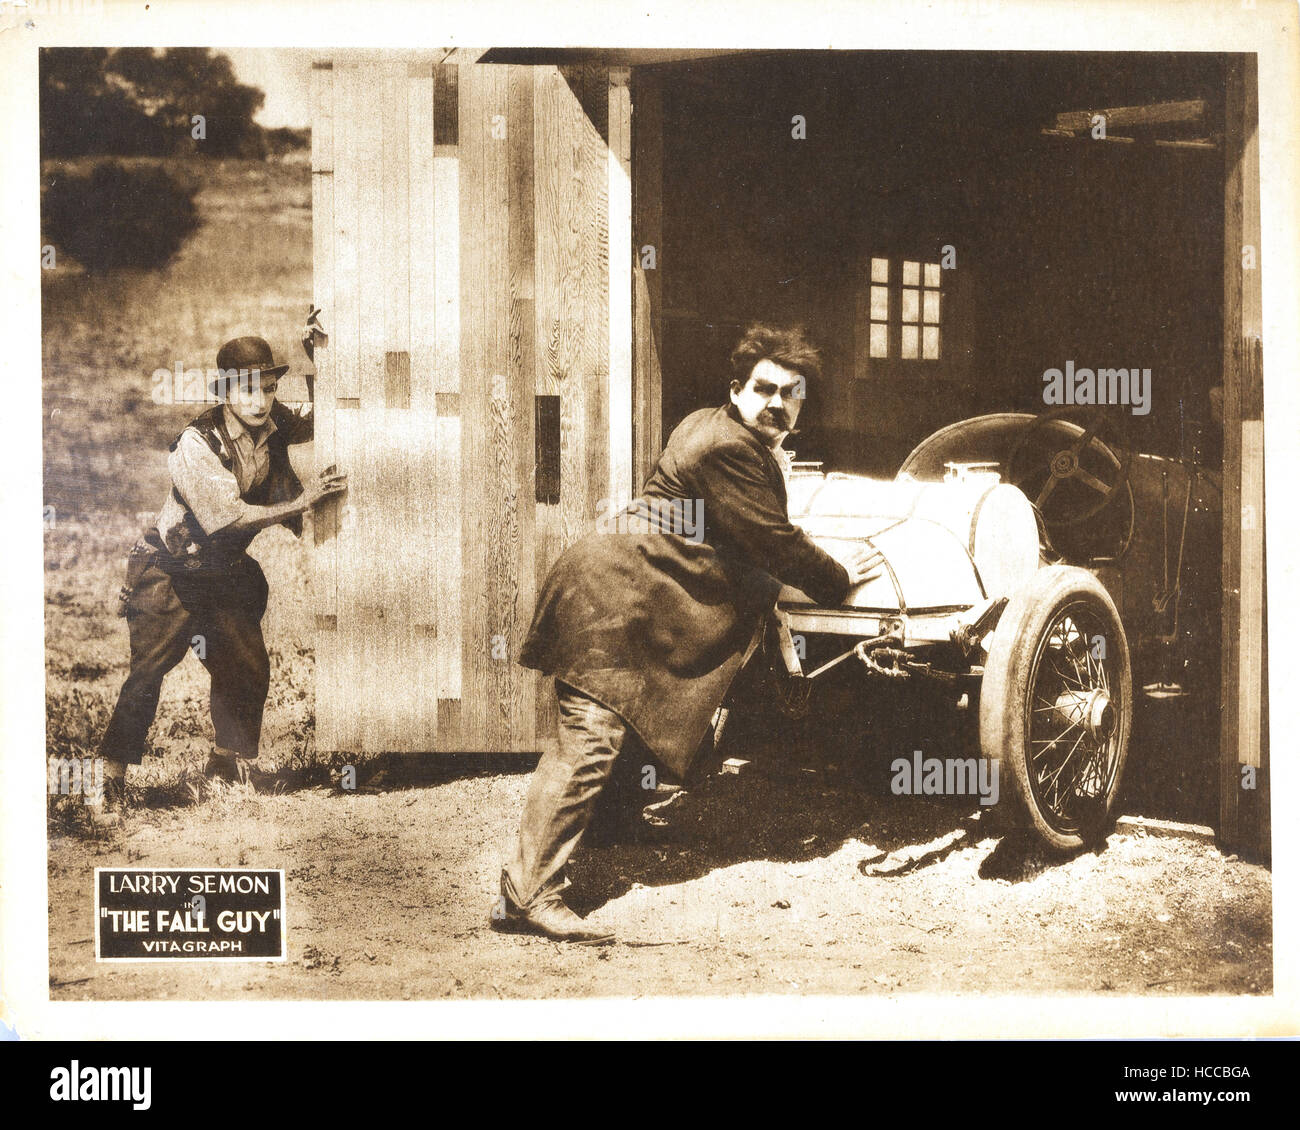 THE FALL GUY, lobbycard, from left: Larry Semon, Oliver Hardy, 1921 ...